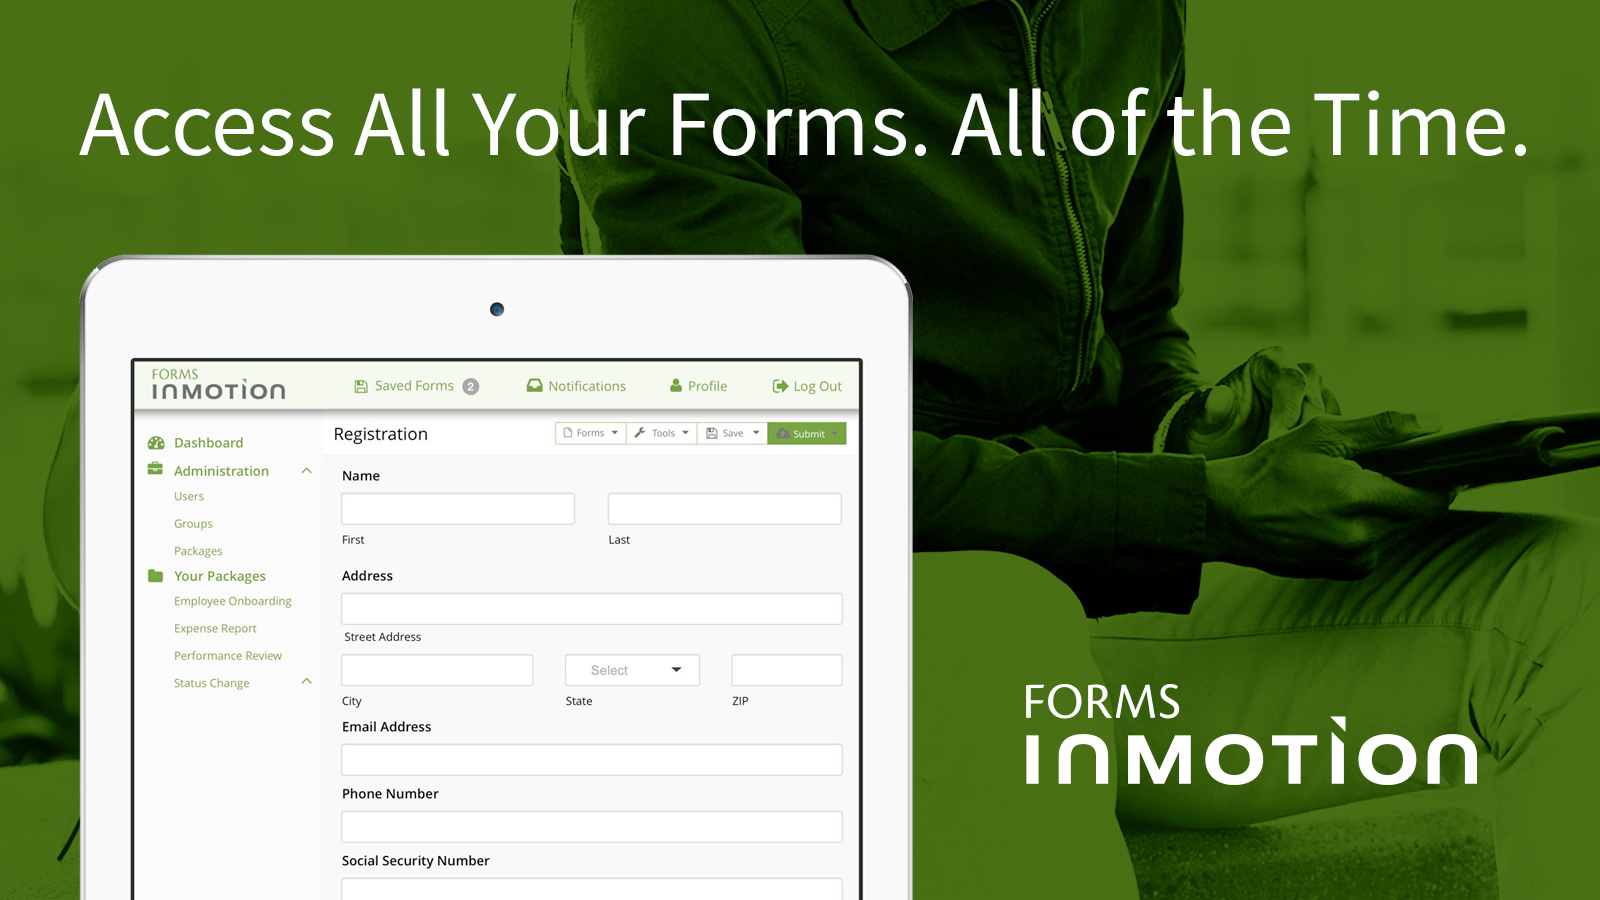 KeyMark Launches New Enterprise Form Management Software Solution Called Forms InMotion